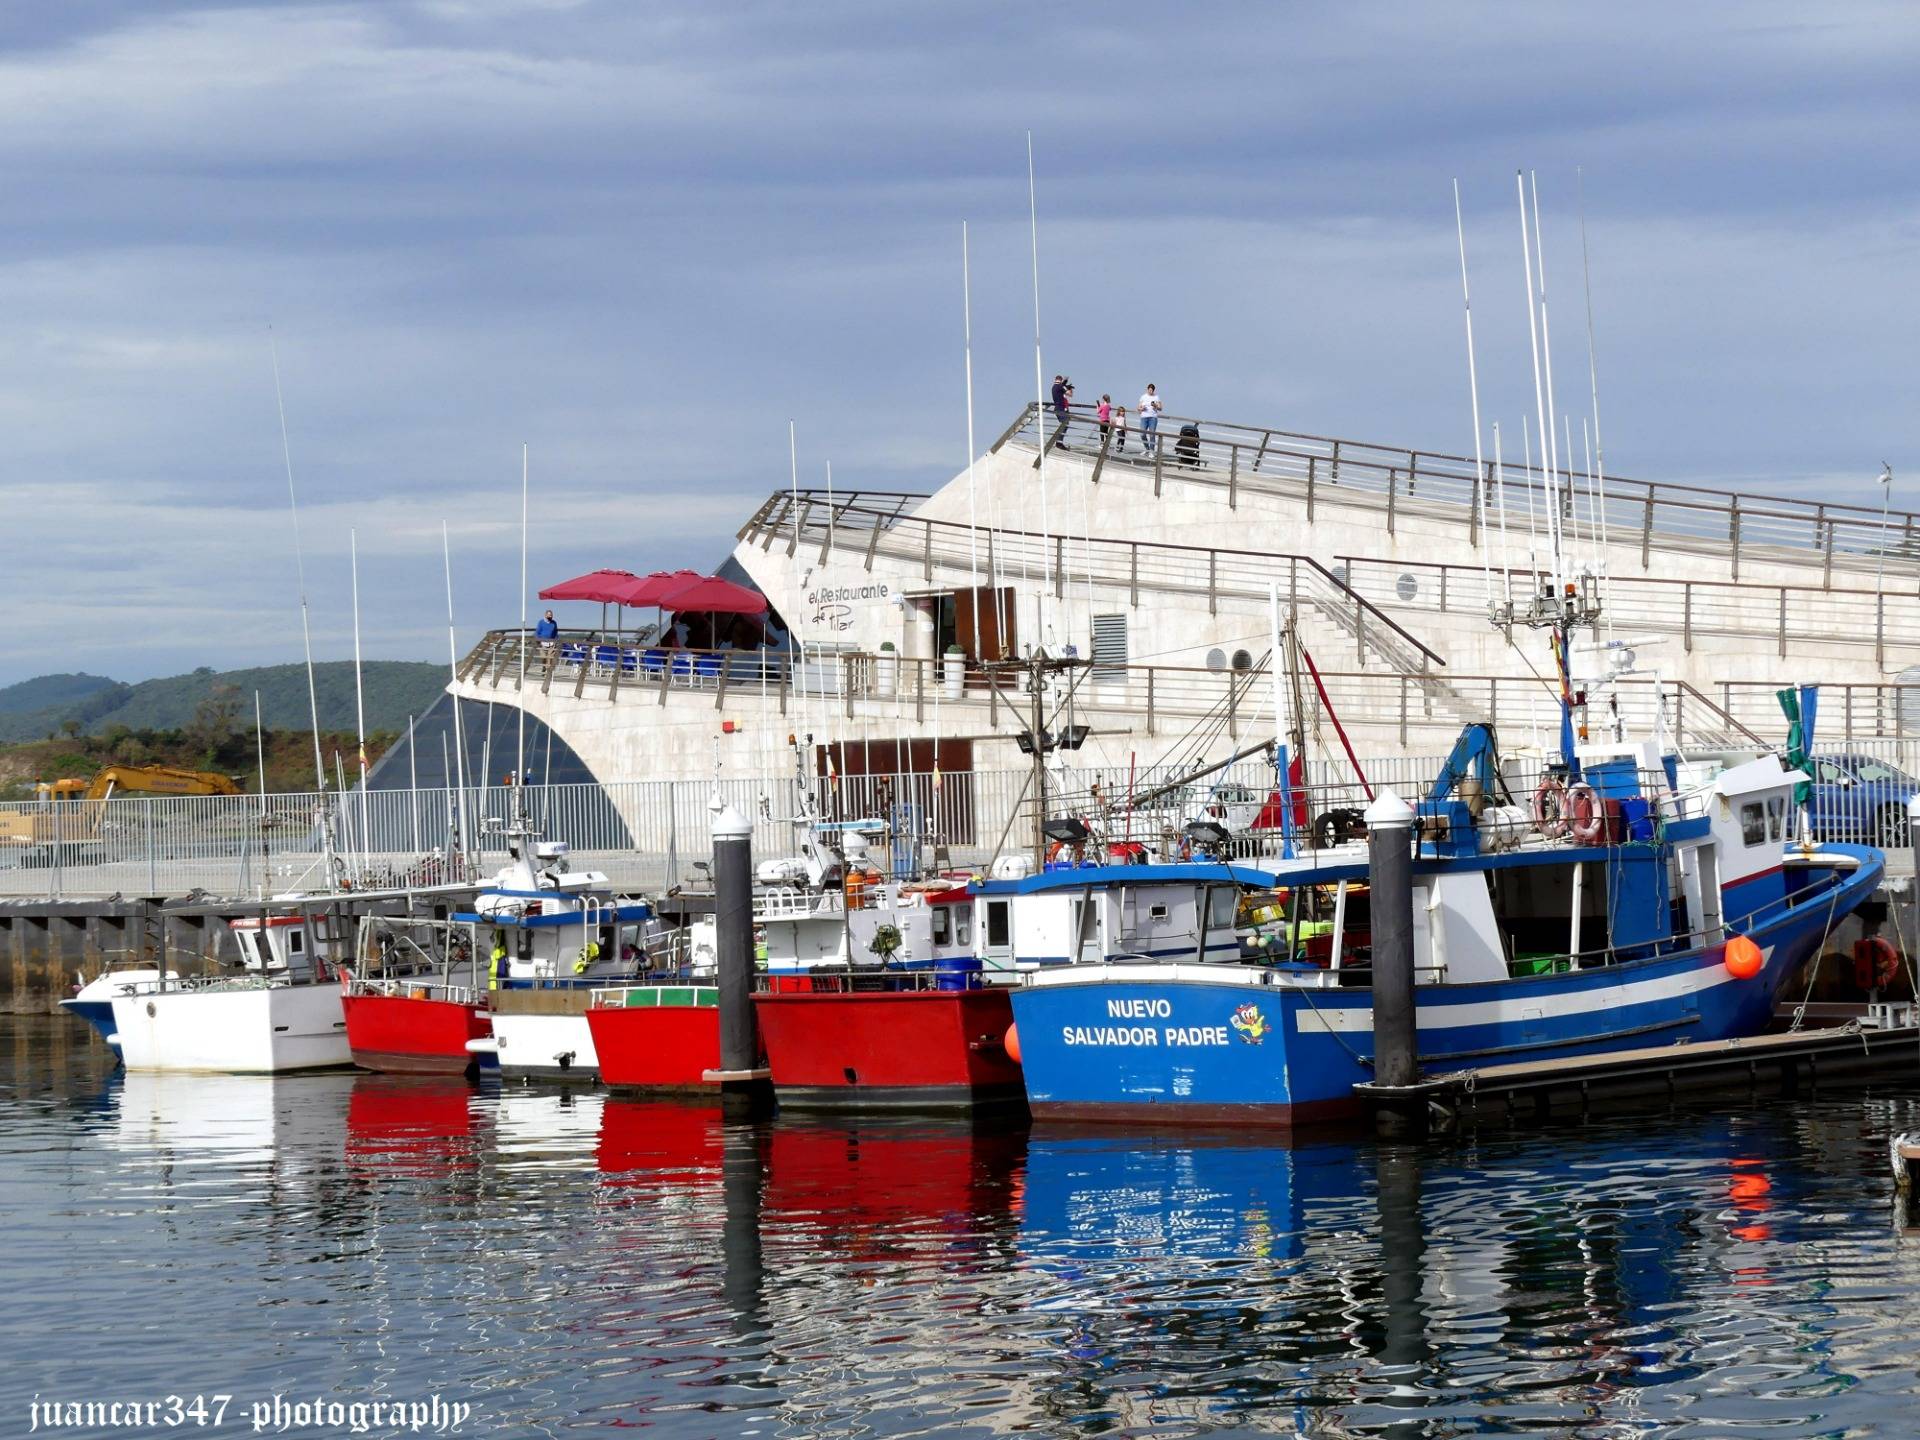 A walk through the port and the Santoña marshes